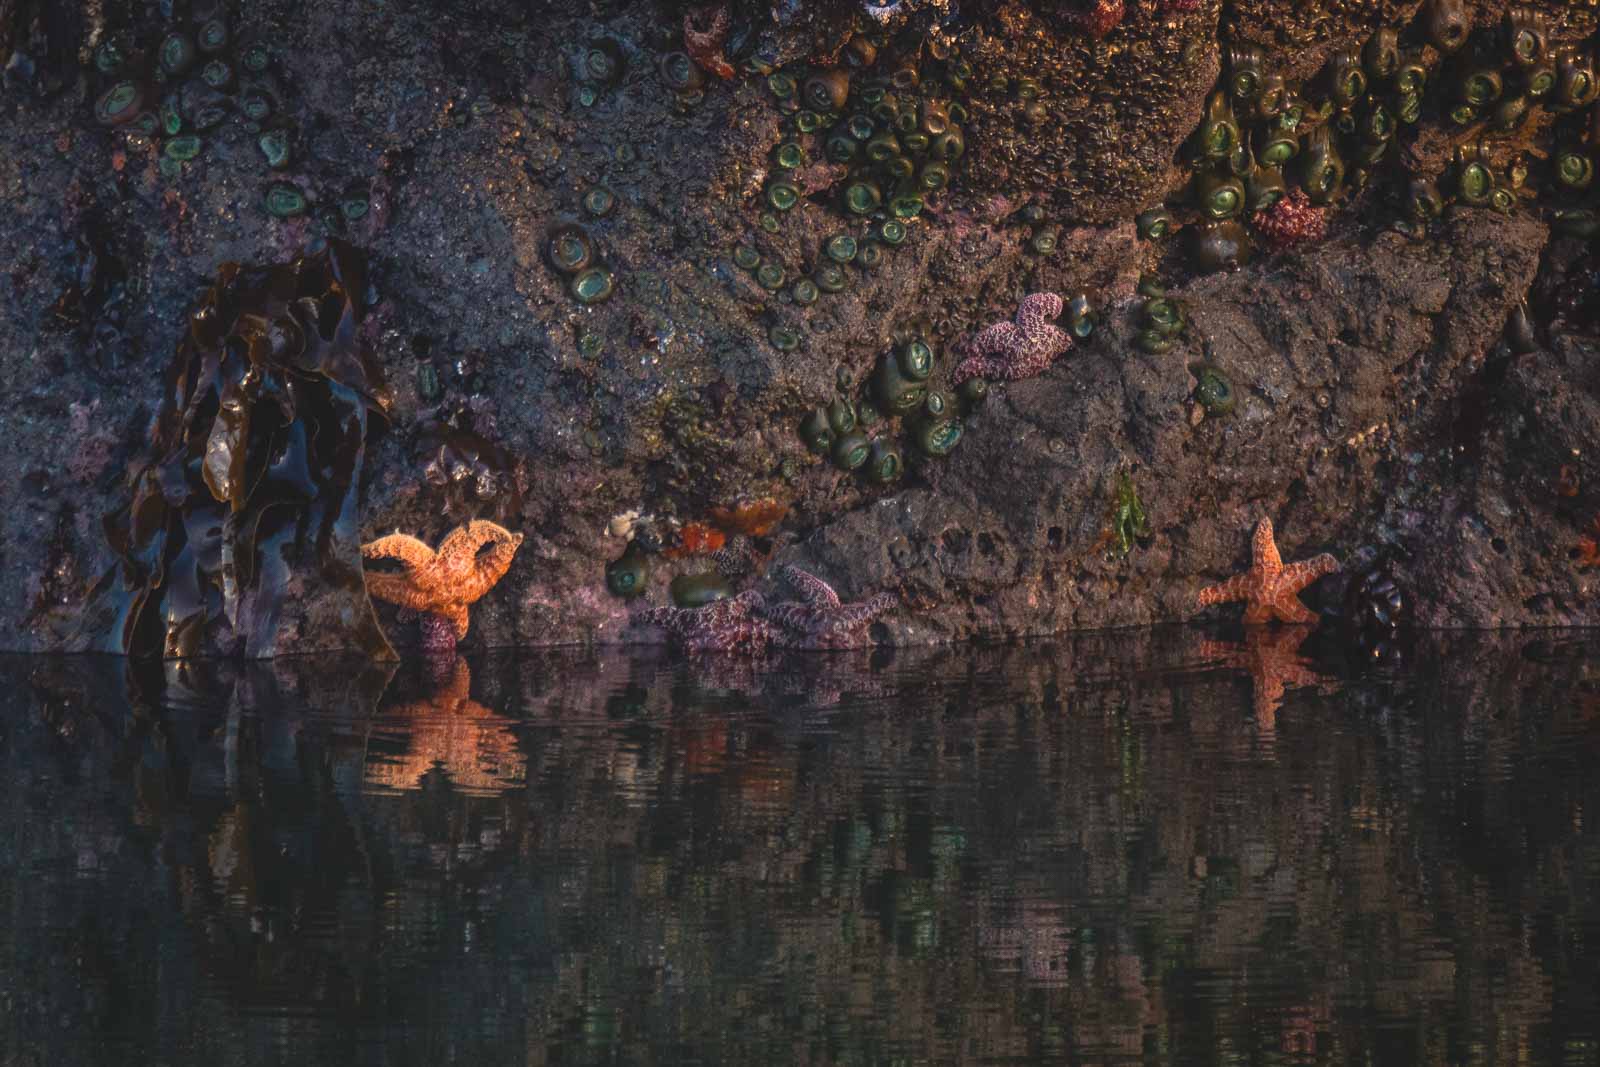 Starfish on a rock within a tide pool and surrounded by barnacles.